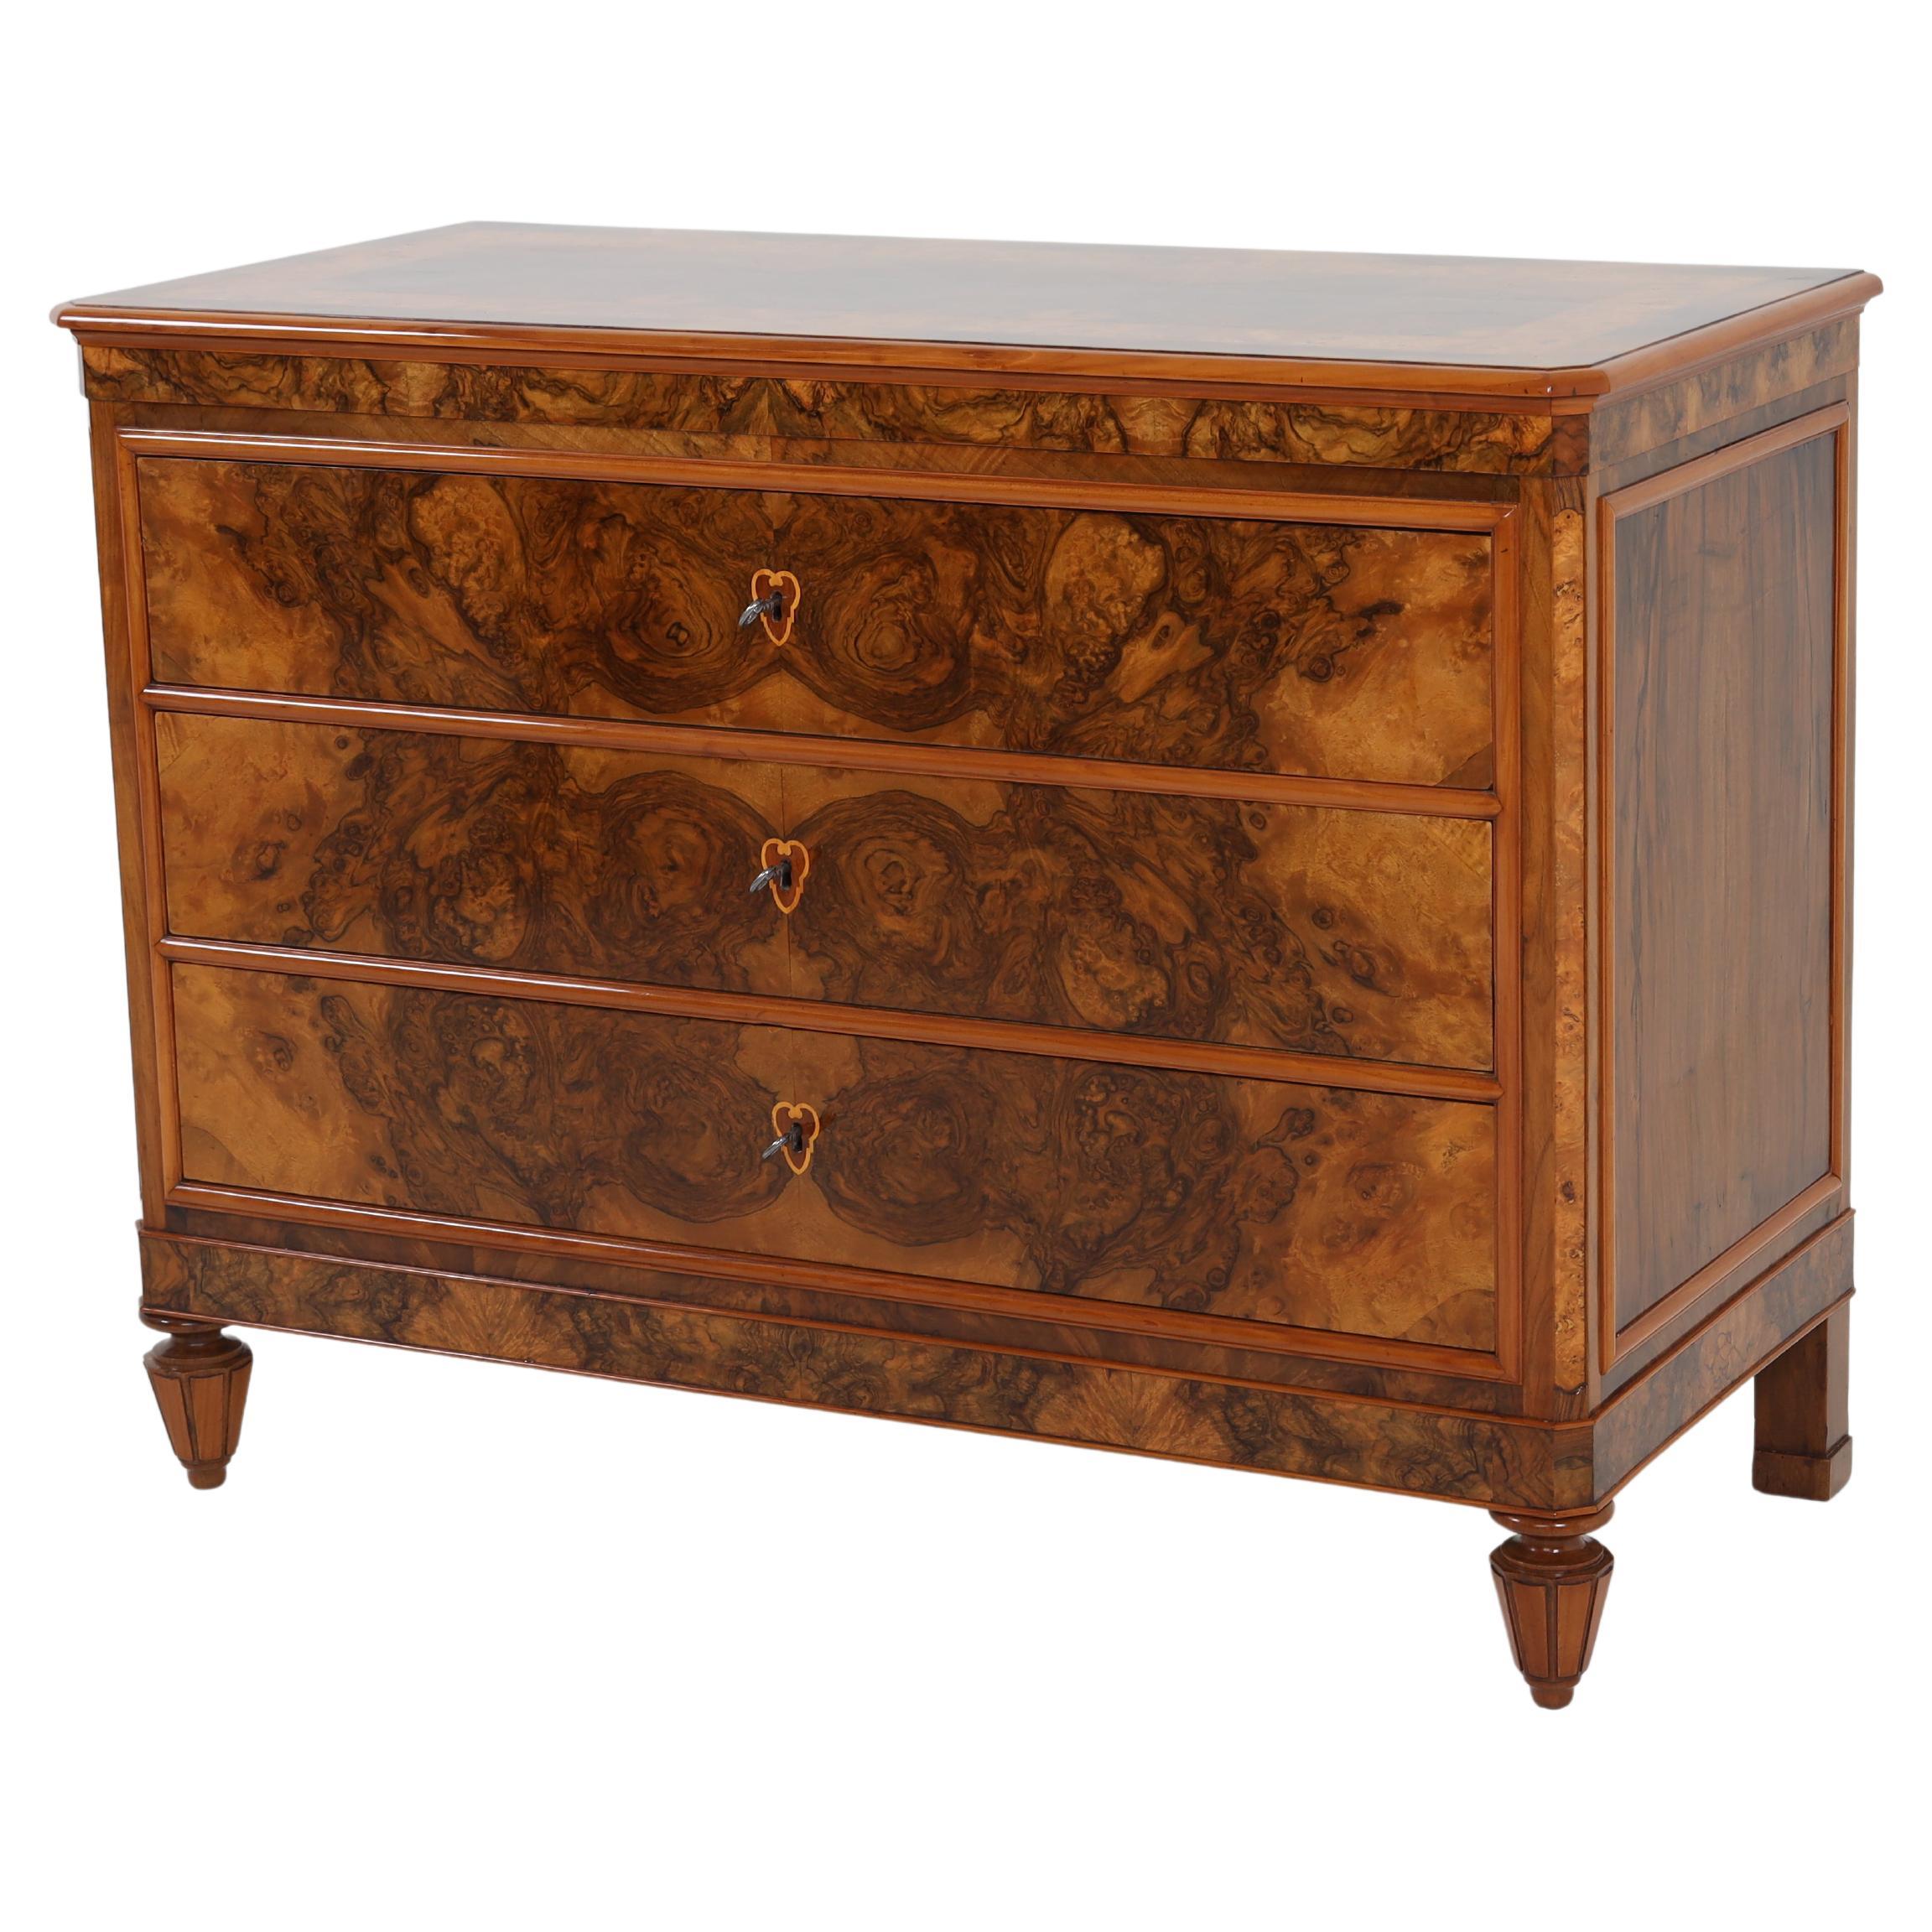 Pair of Italian chests of drawers in walnut and burl veneer with profiled crossbars. The commodes are in a restored and hand polished condition.